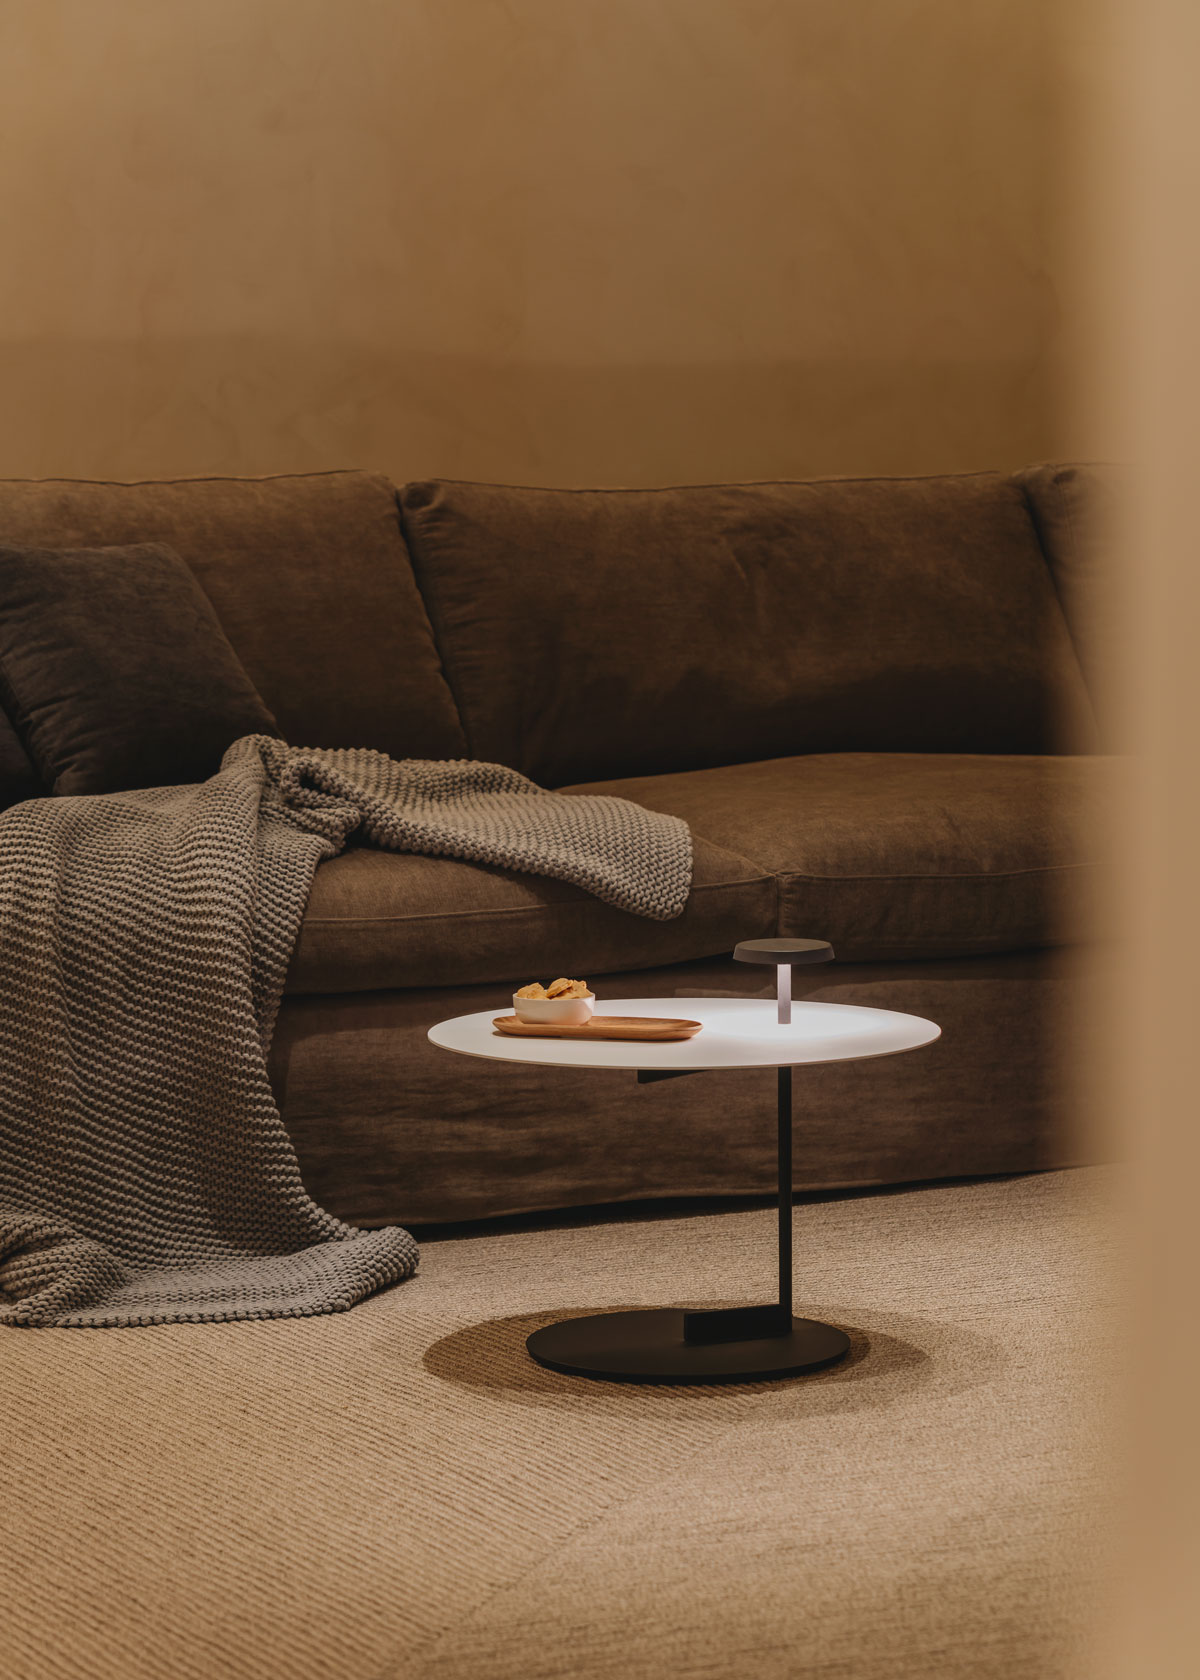 Vibia The Edit - Atmospheres designed for winter wellbeing - Flat